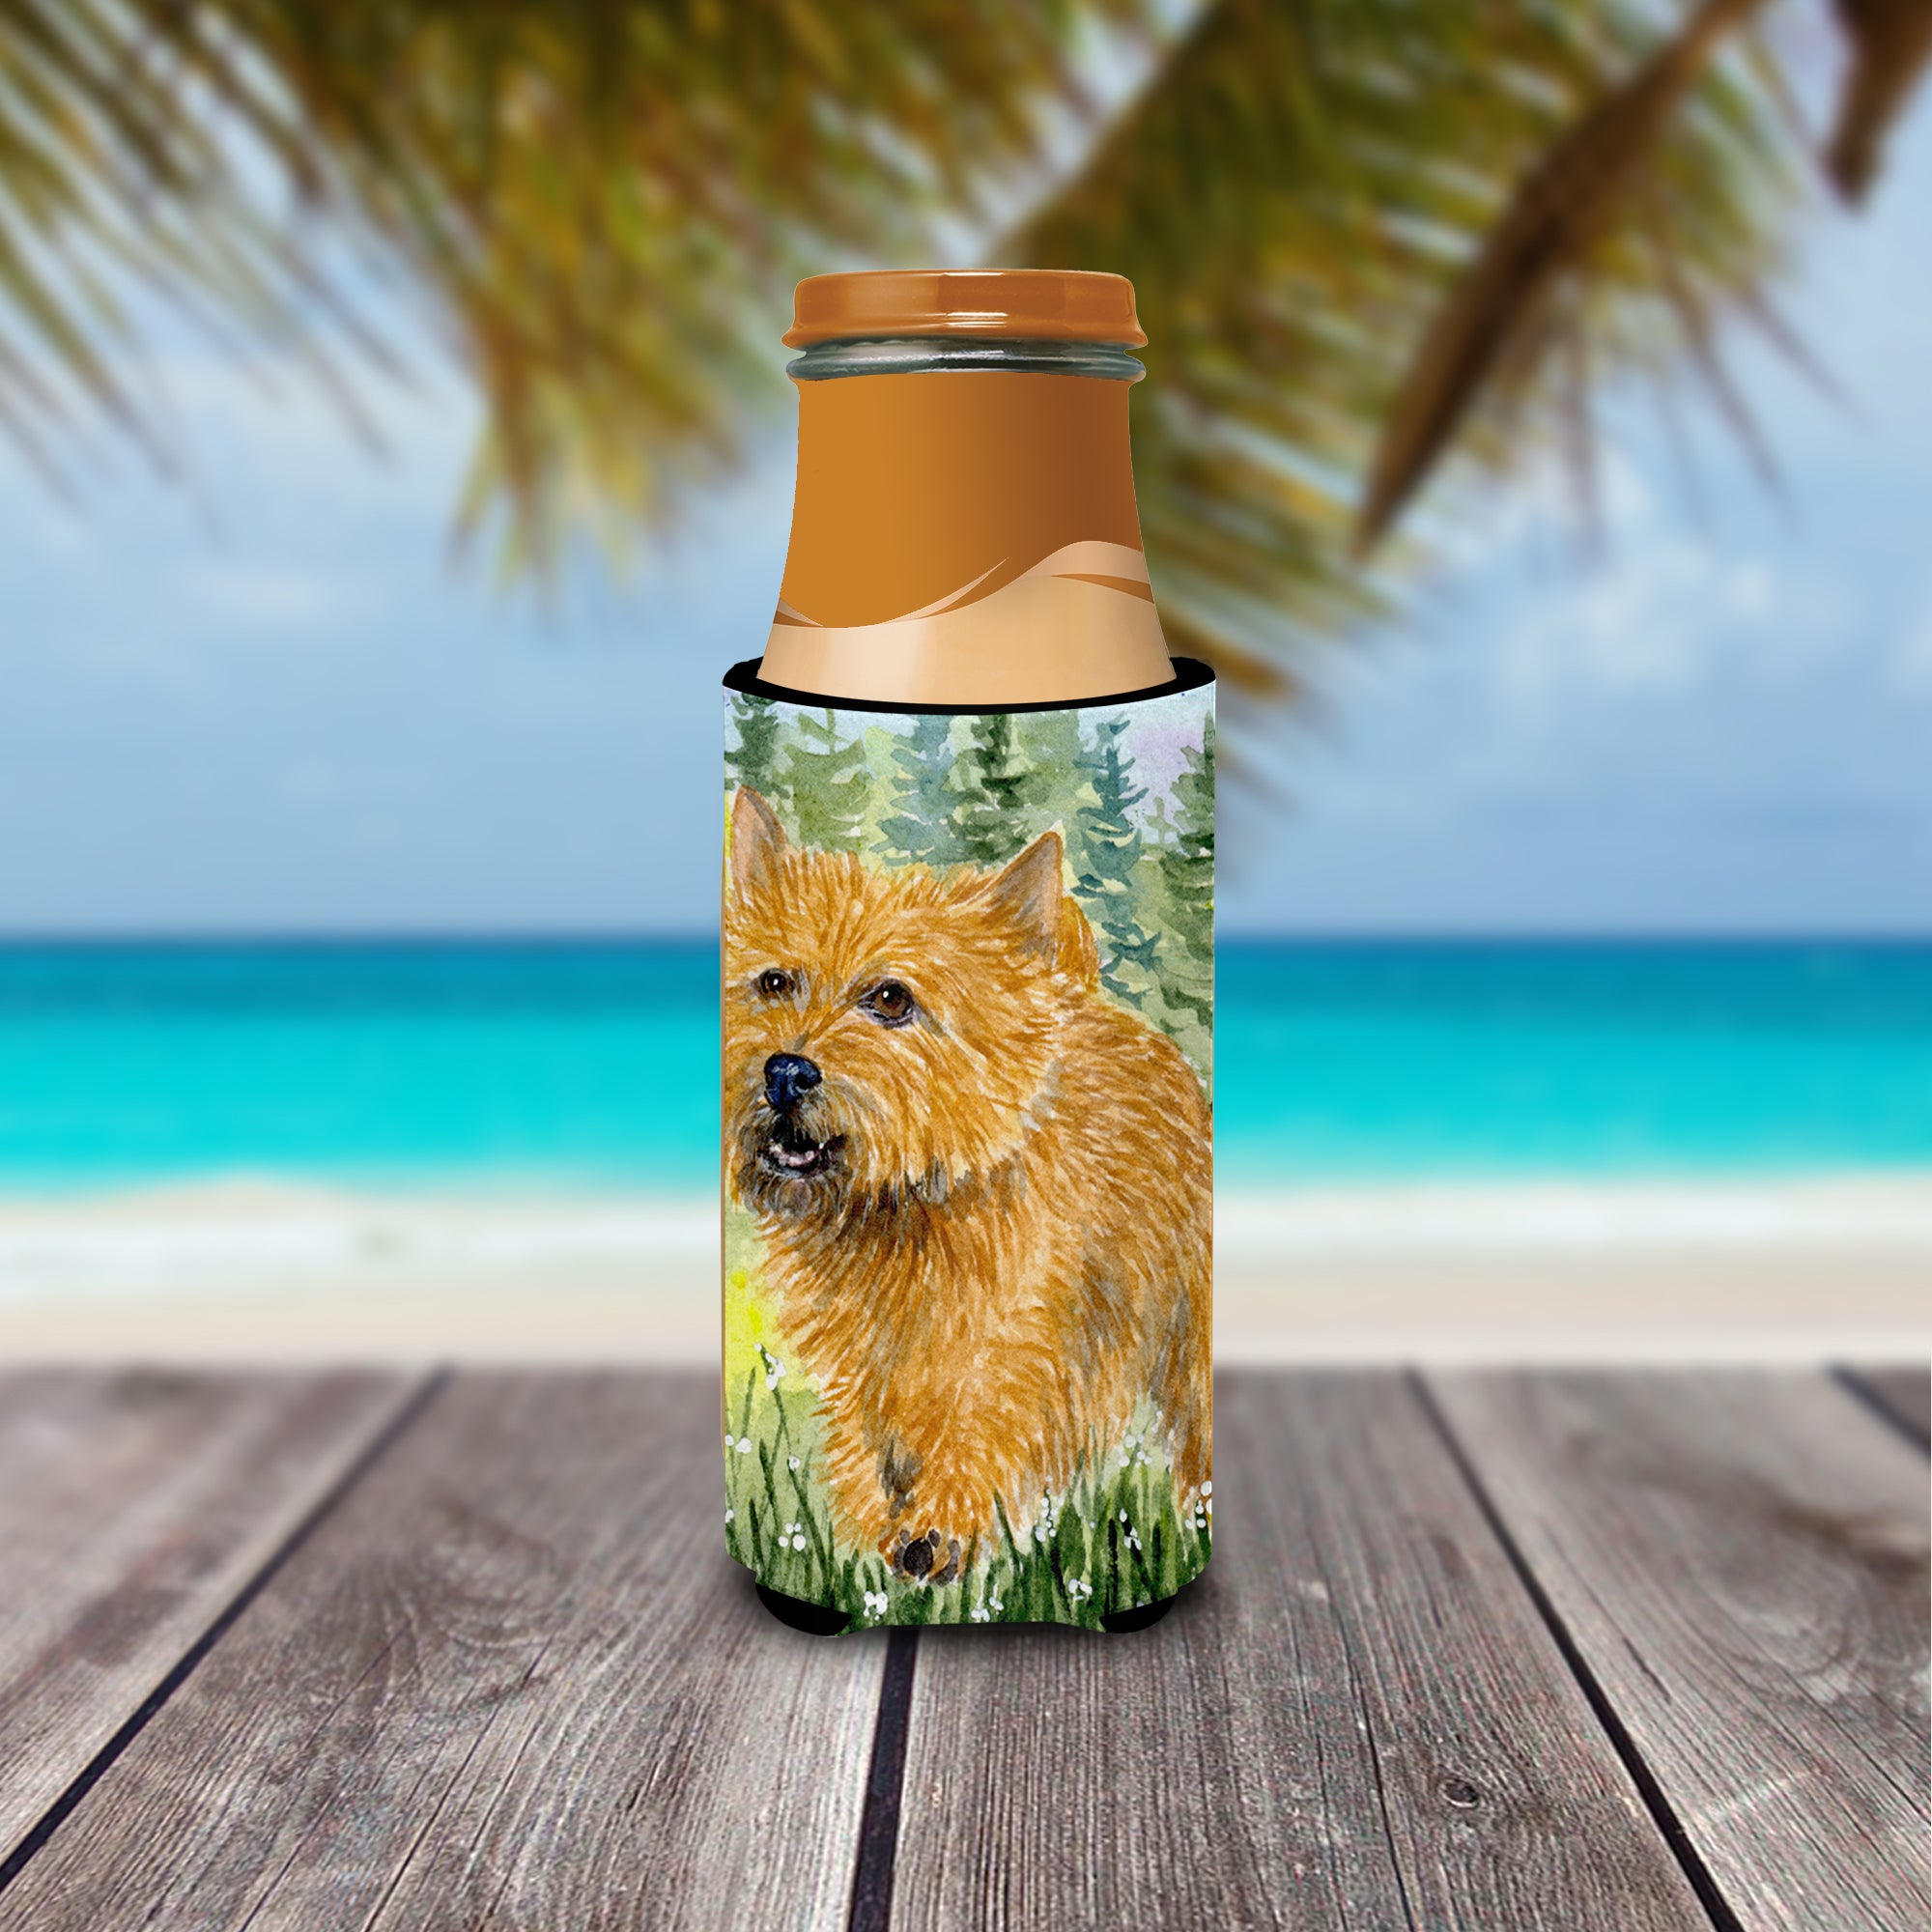 Norwich Terrier Ultra Beverage Insulators for slim cans SS8878MUK